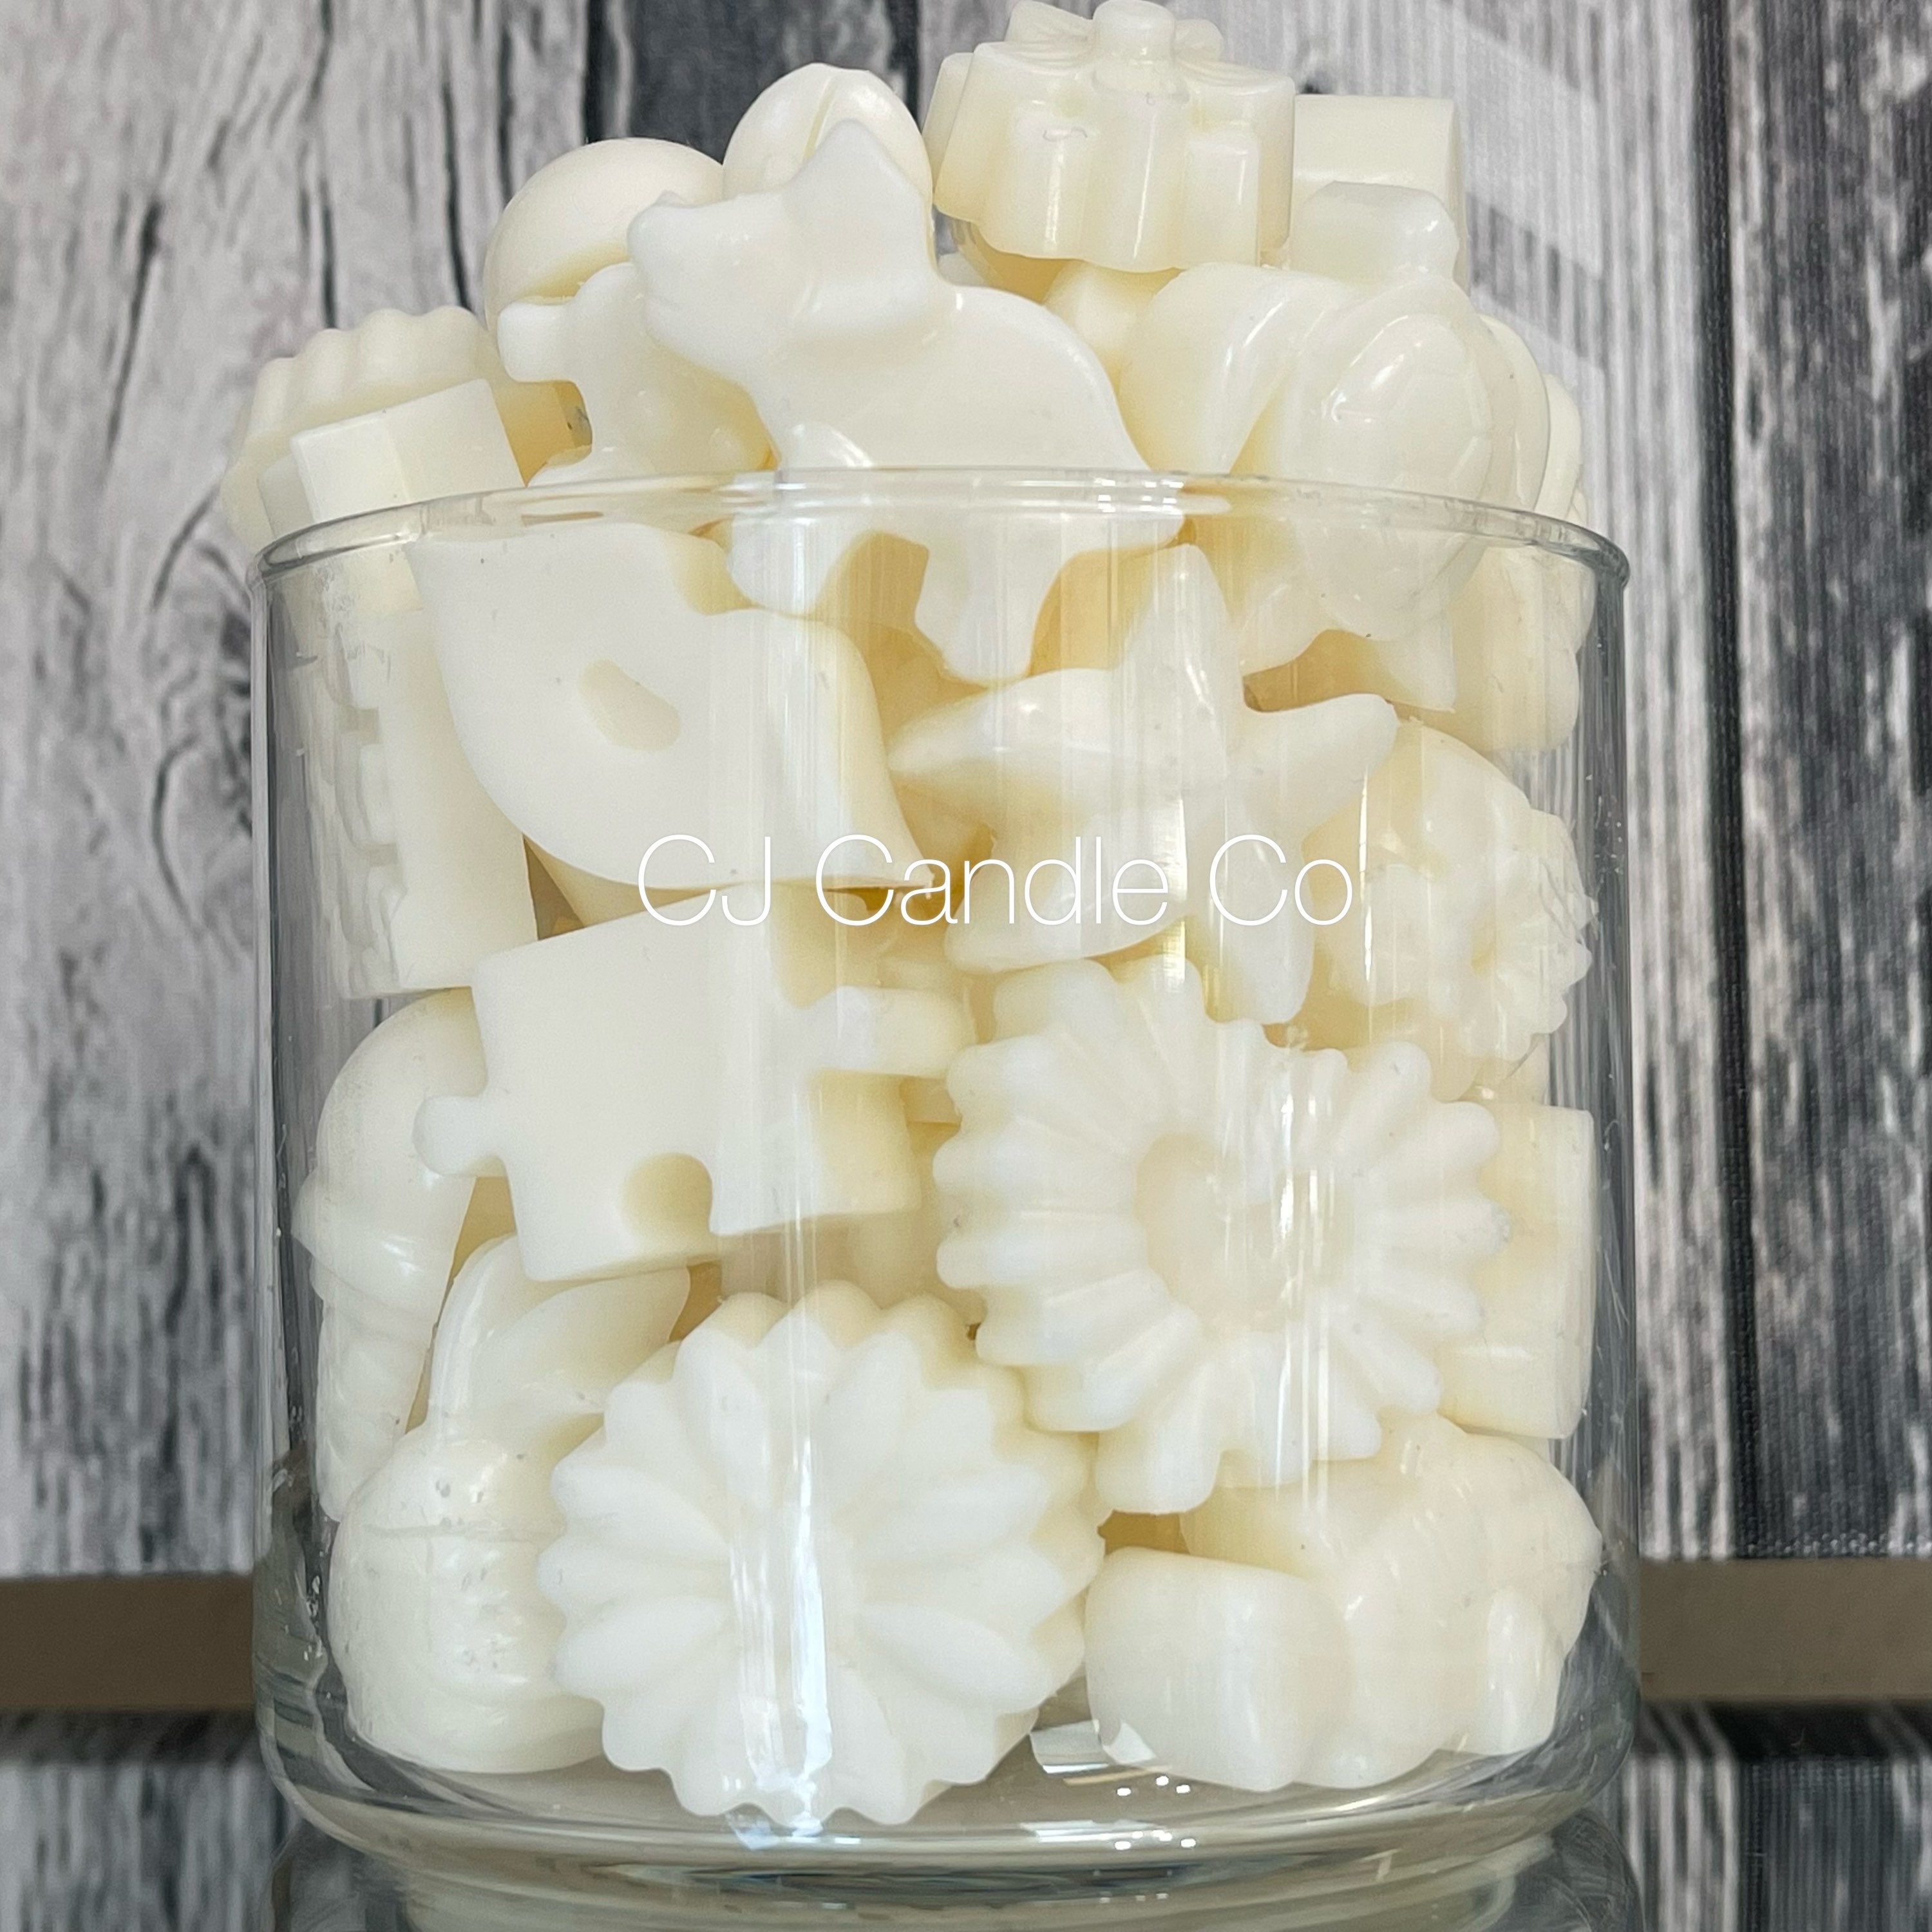 Paradise Cove Bath & Body Works Candle Wax Melts BBW Wax Melts Perfect Gift  for Mom, Sister, Best Friend, Valentines BBW Wax Melts 